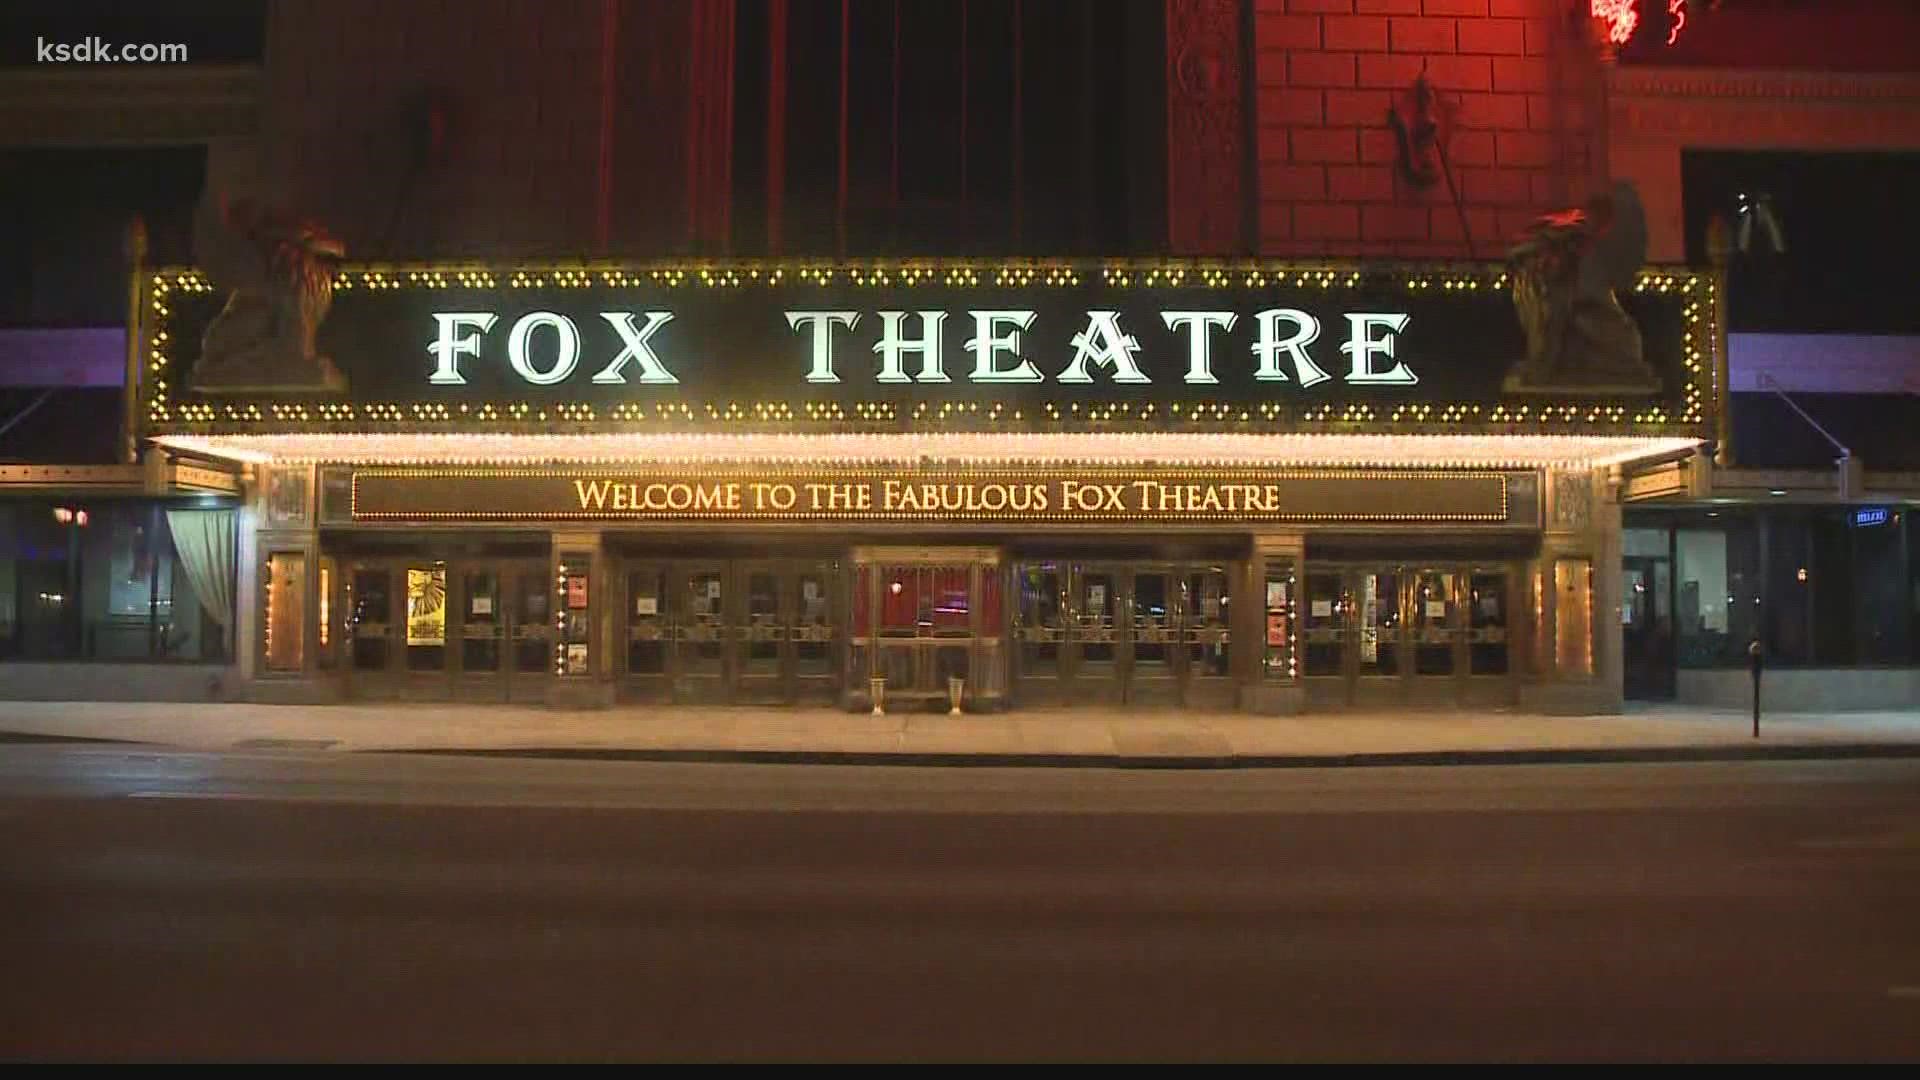 Hamilton fans were out of luck Thursday night after a power outage at the Fabulous Fox.